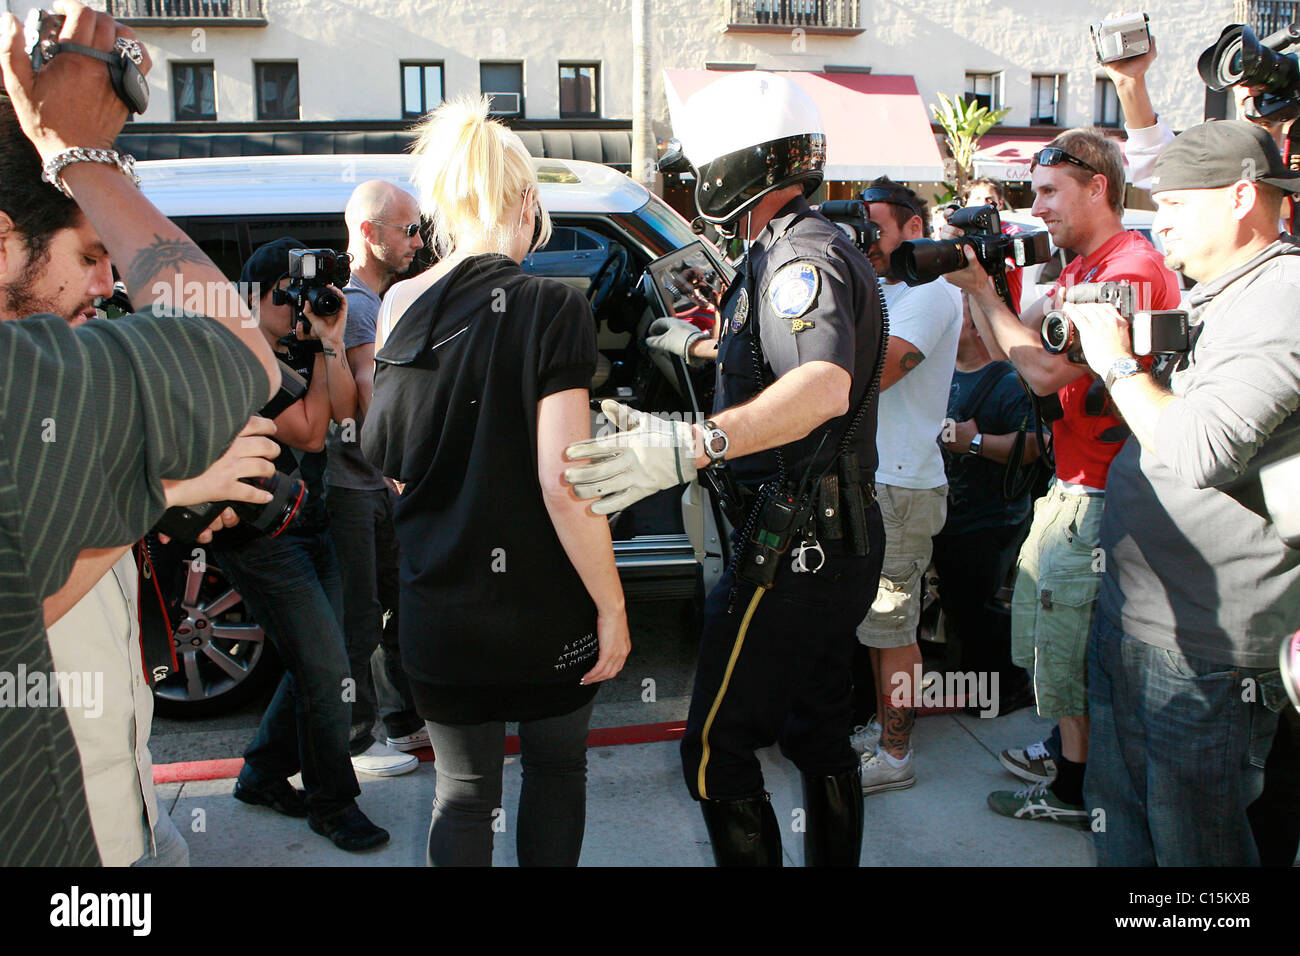 Gwen Stefani is escorted by a police officer after shopping at the children's boutique Trico Field Los Angeles, California - Stock Photo